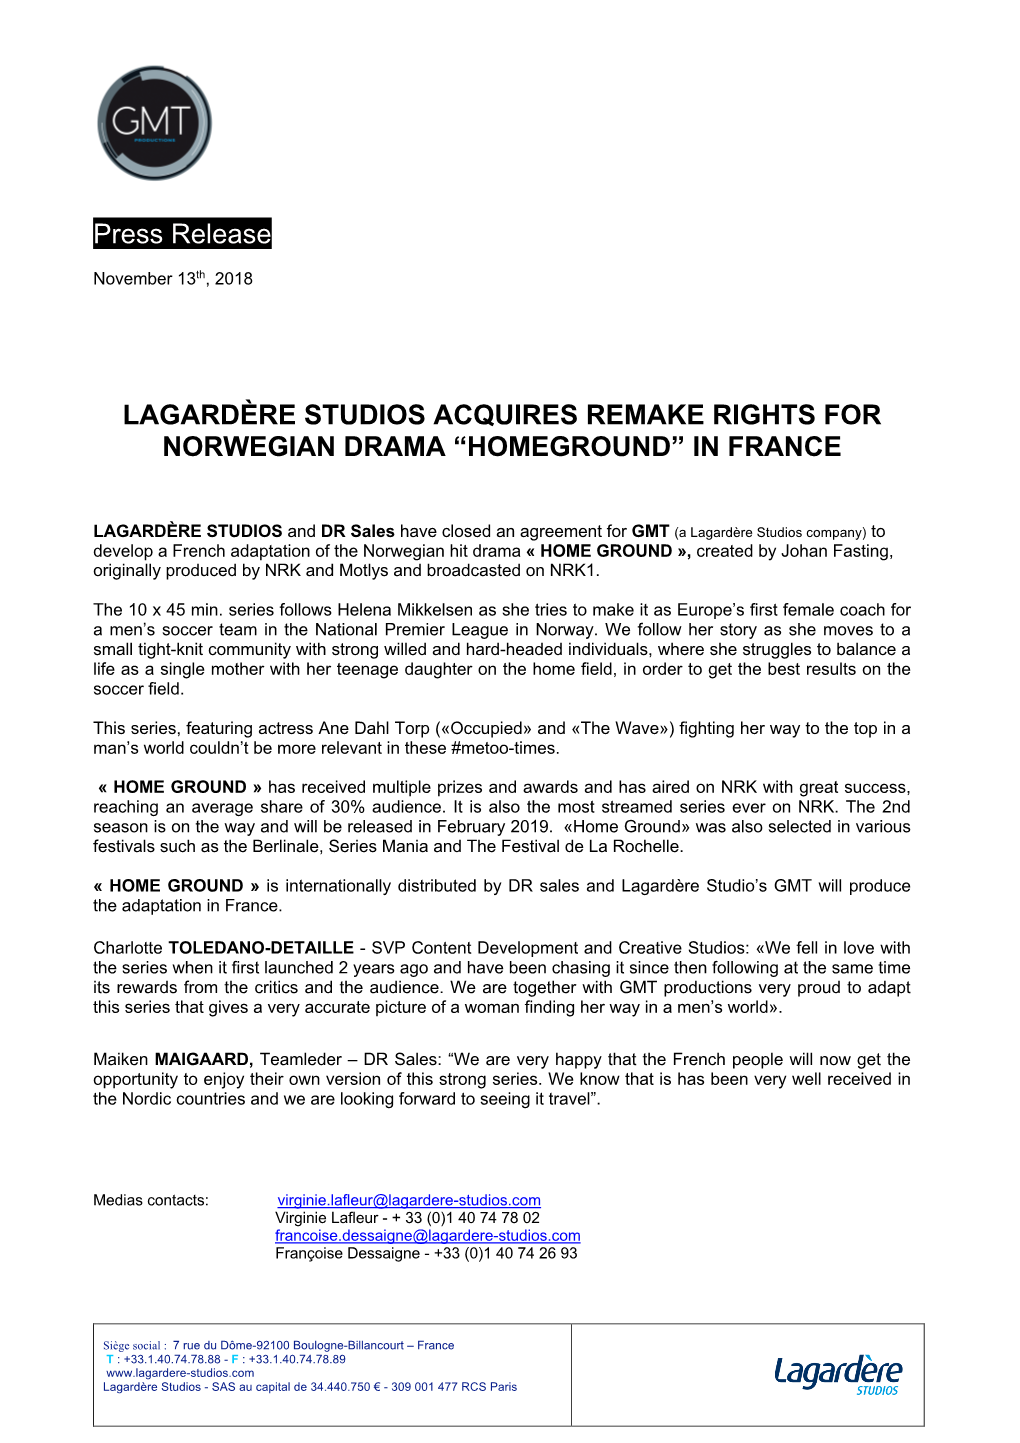 Lagardère Studios Acquires Remake Rights for Norwegian Drama “Homeground” in France